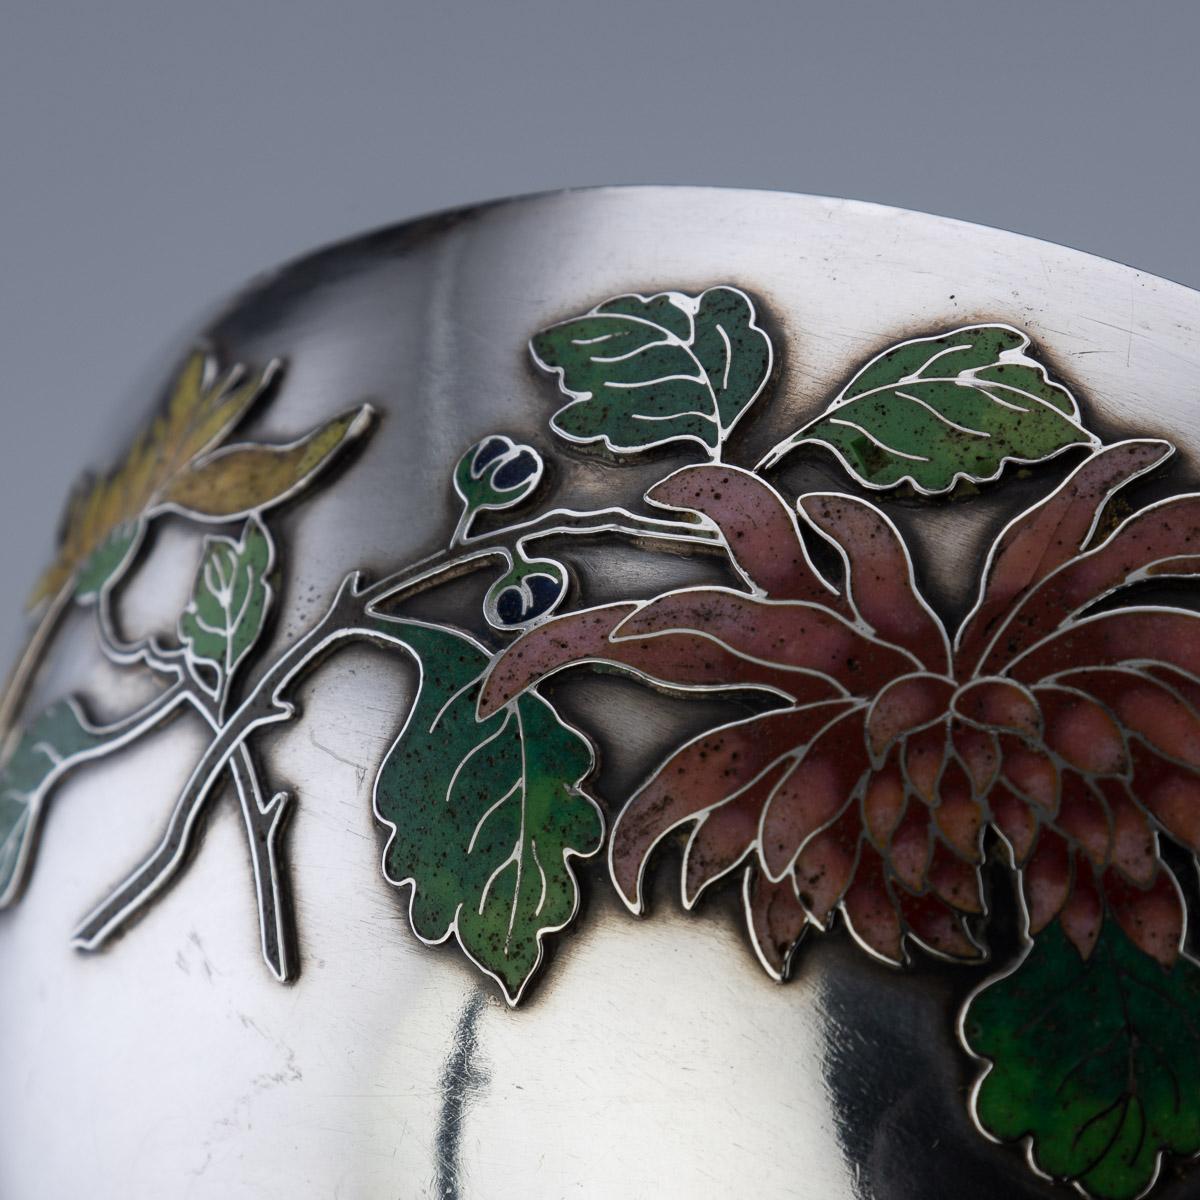 19th Century Rare Chinese Export Solid Silver & Enamel Bowl, Wang Hing, c.1890 For Sale 11